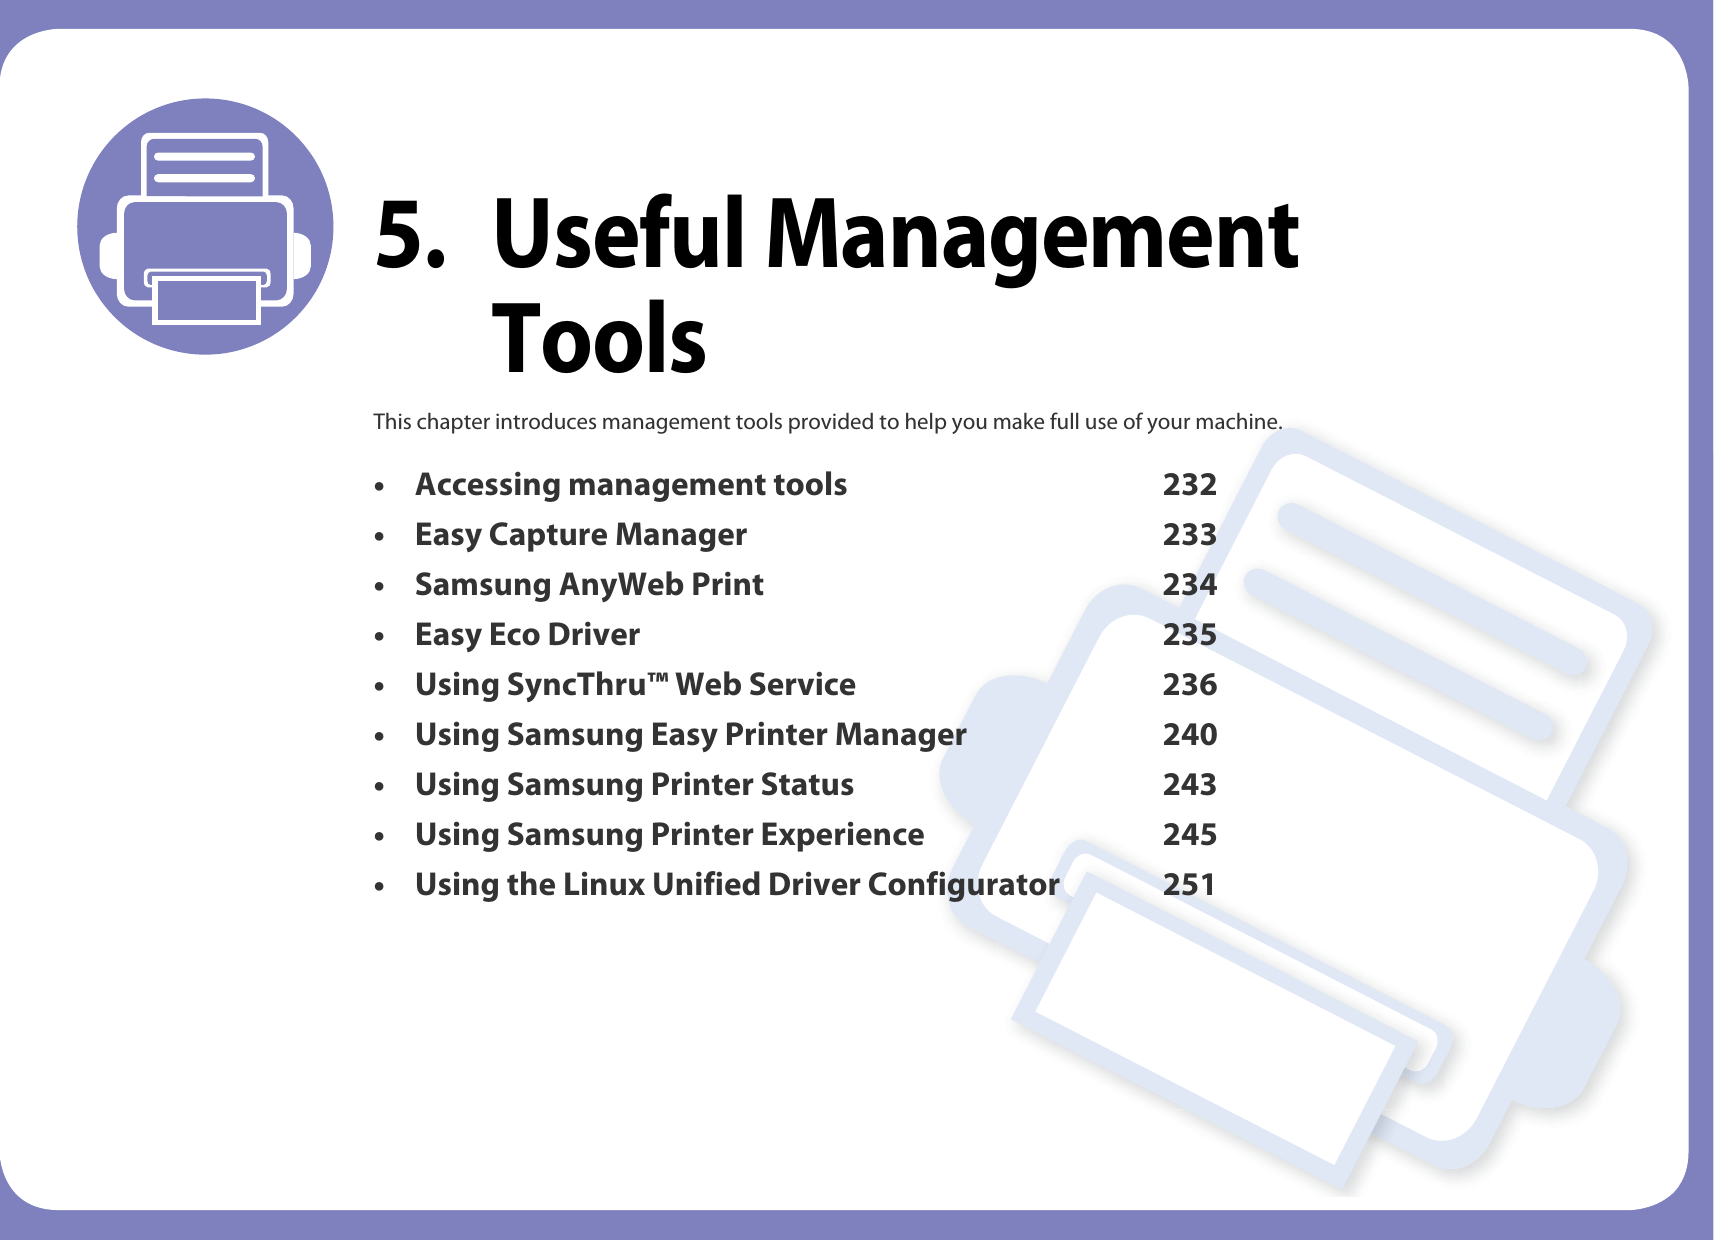 5. Useful Management ToolsThis chapter introduces management tools provided to help you make full use of your machine. • Accessing management tools 232• Easy Capture Manager 233• Samsung AnyWeb Print 234• Easy Eco Driver 235• Using SyncThru™ Web Service 236• Using Samsung Easy Printer Manager 240• Using Samsung Printer Status 243• Using Samsung Printer Experience 245• Using the Linux Unified Driver Configurator 251